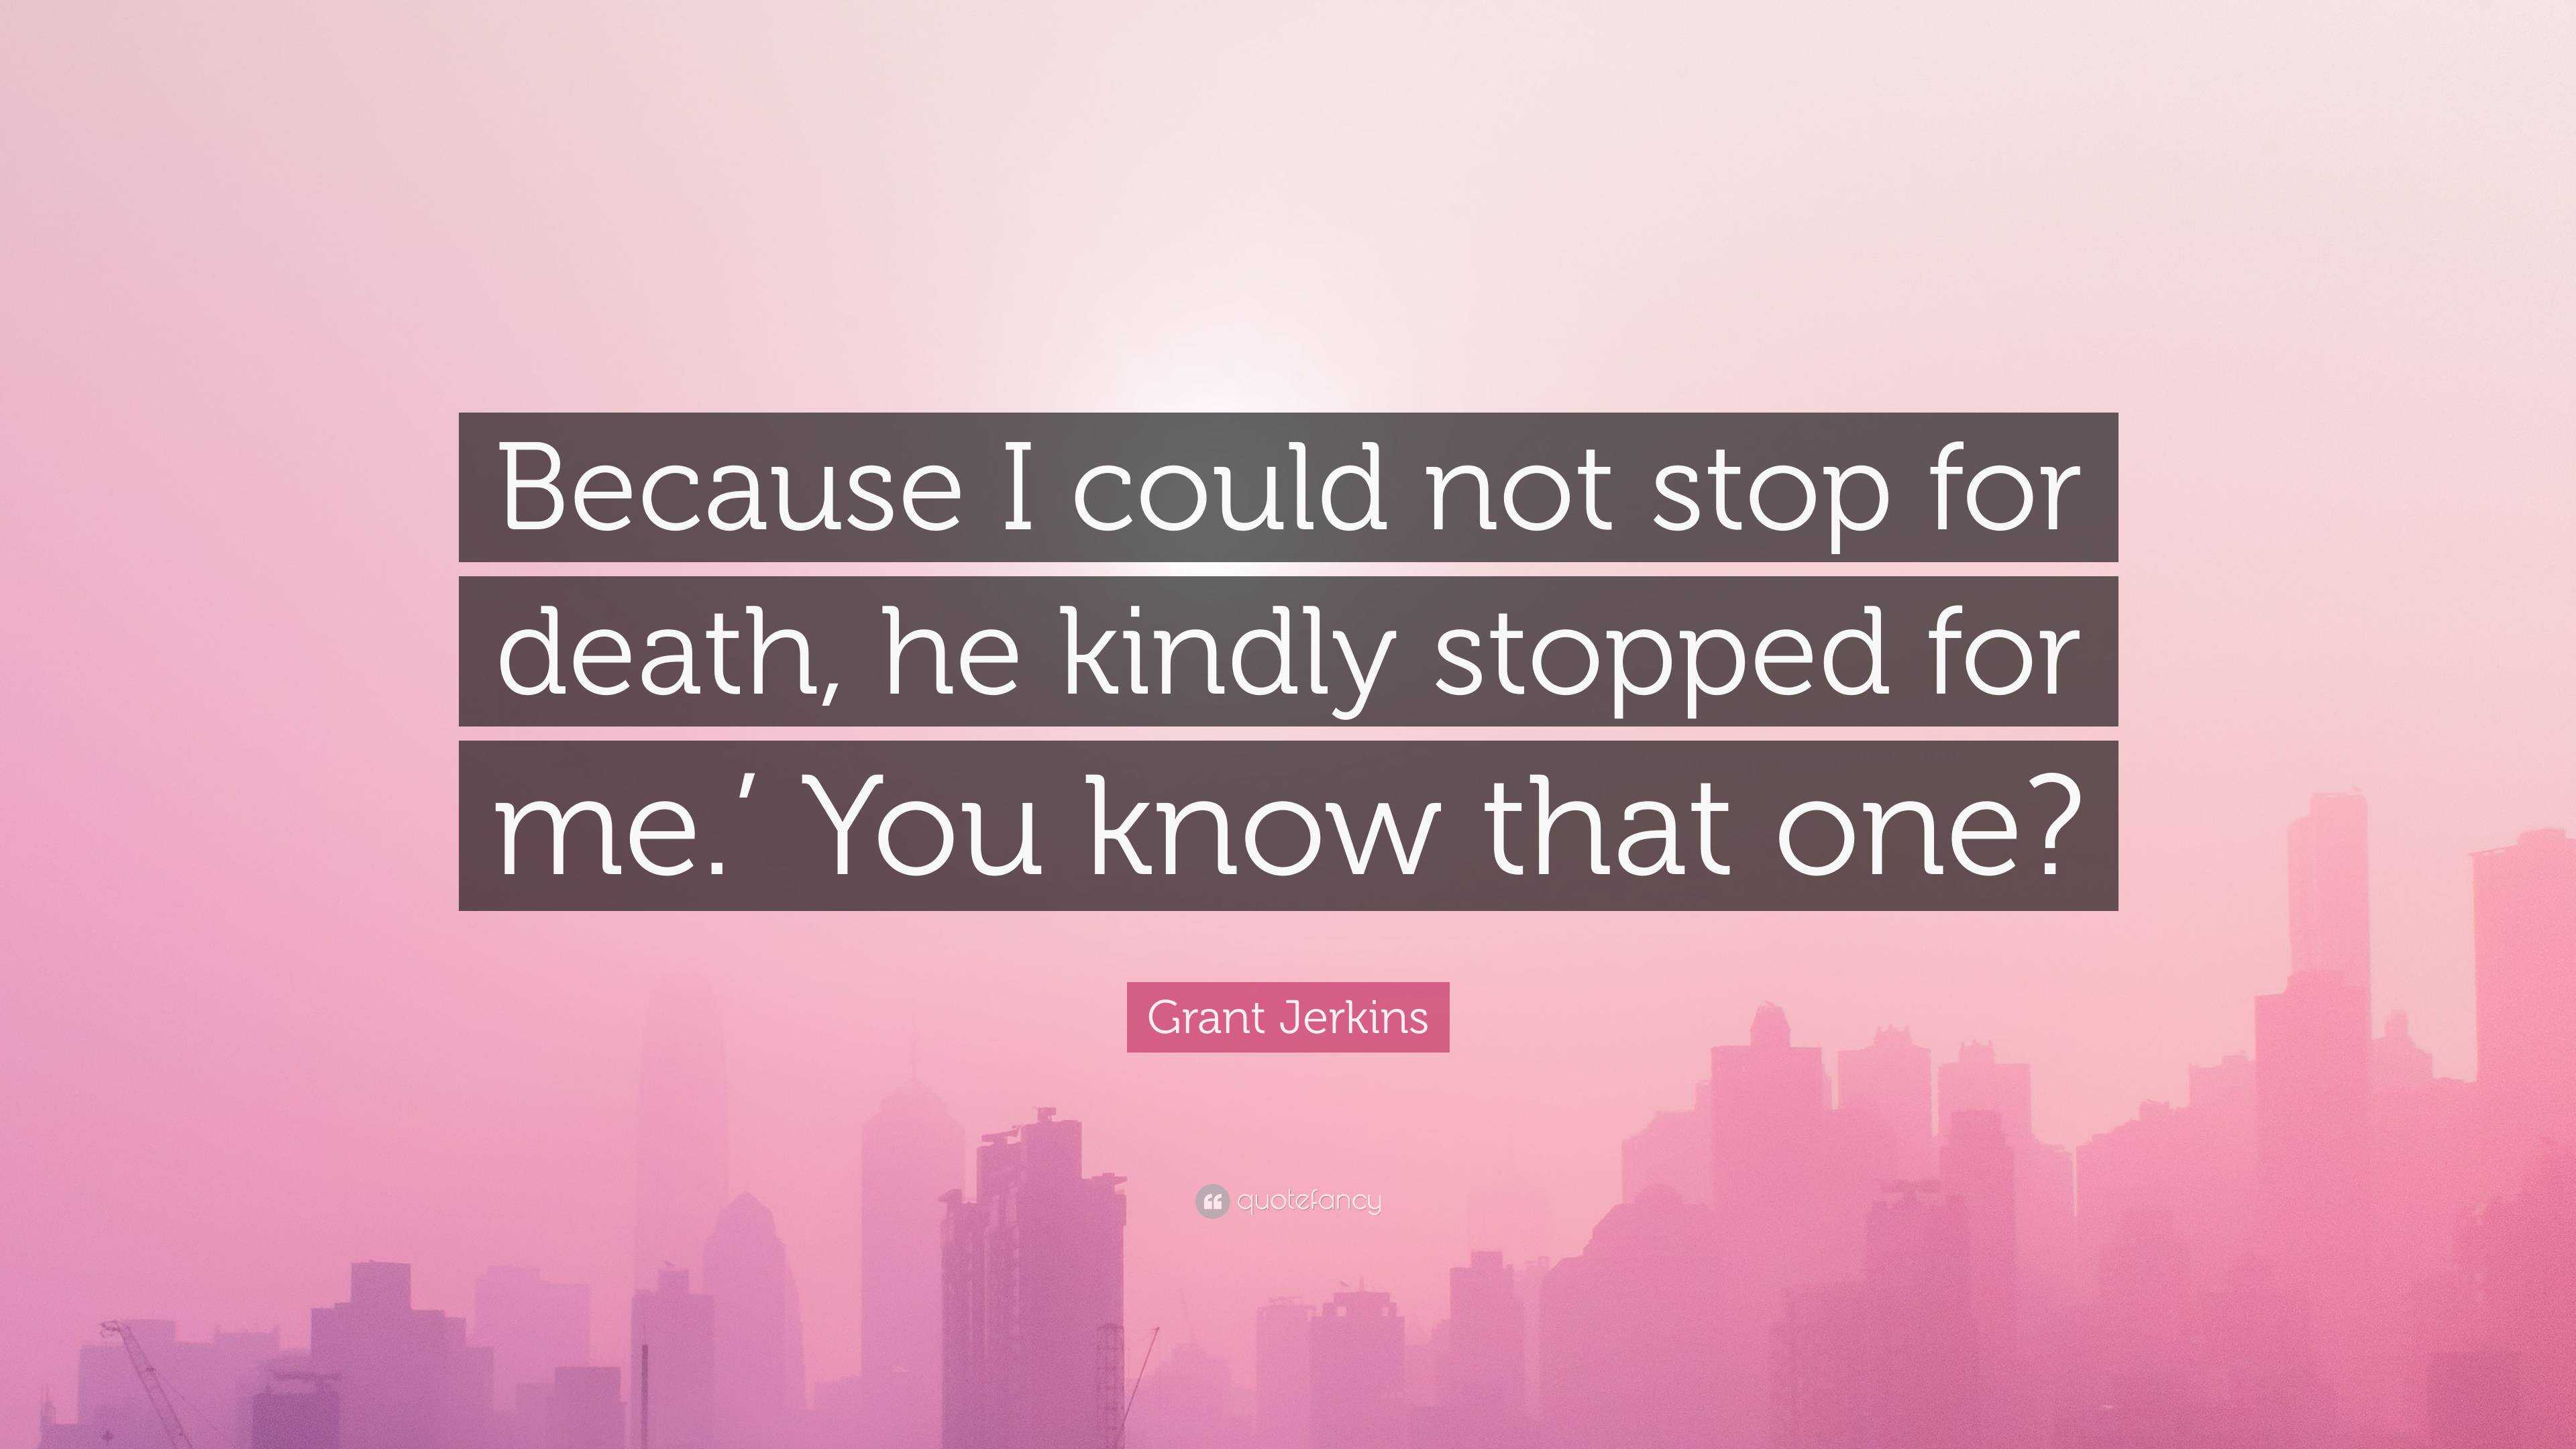 Grant Jerkins Quote: “Because I could not stop for death, he kindly ...